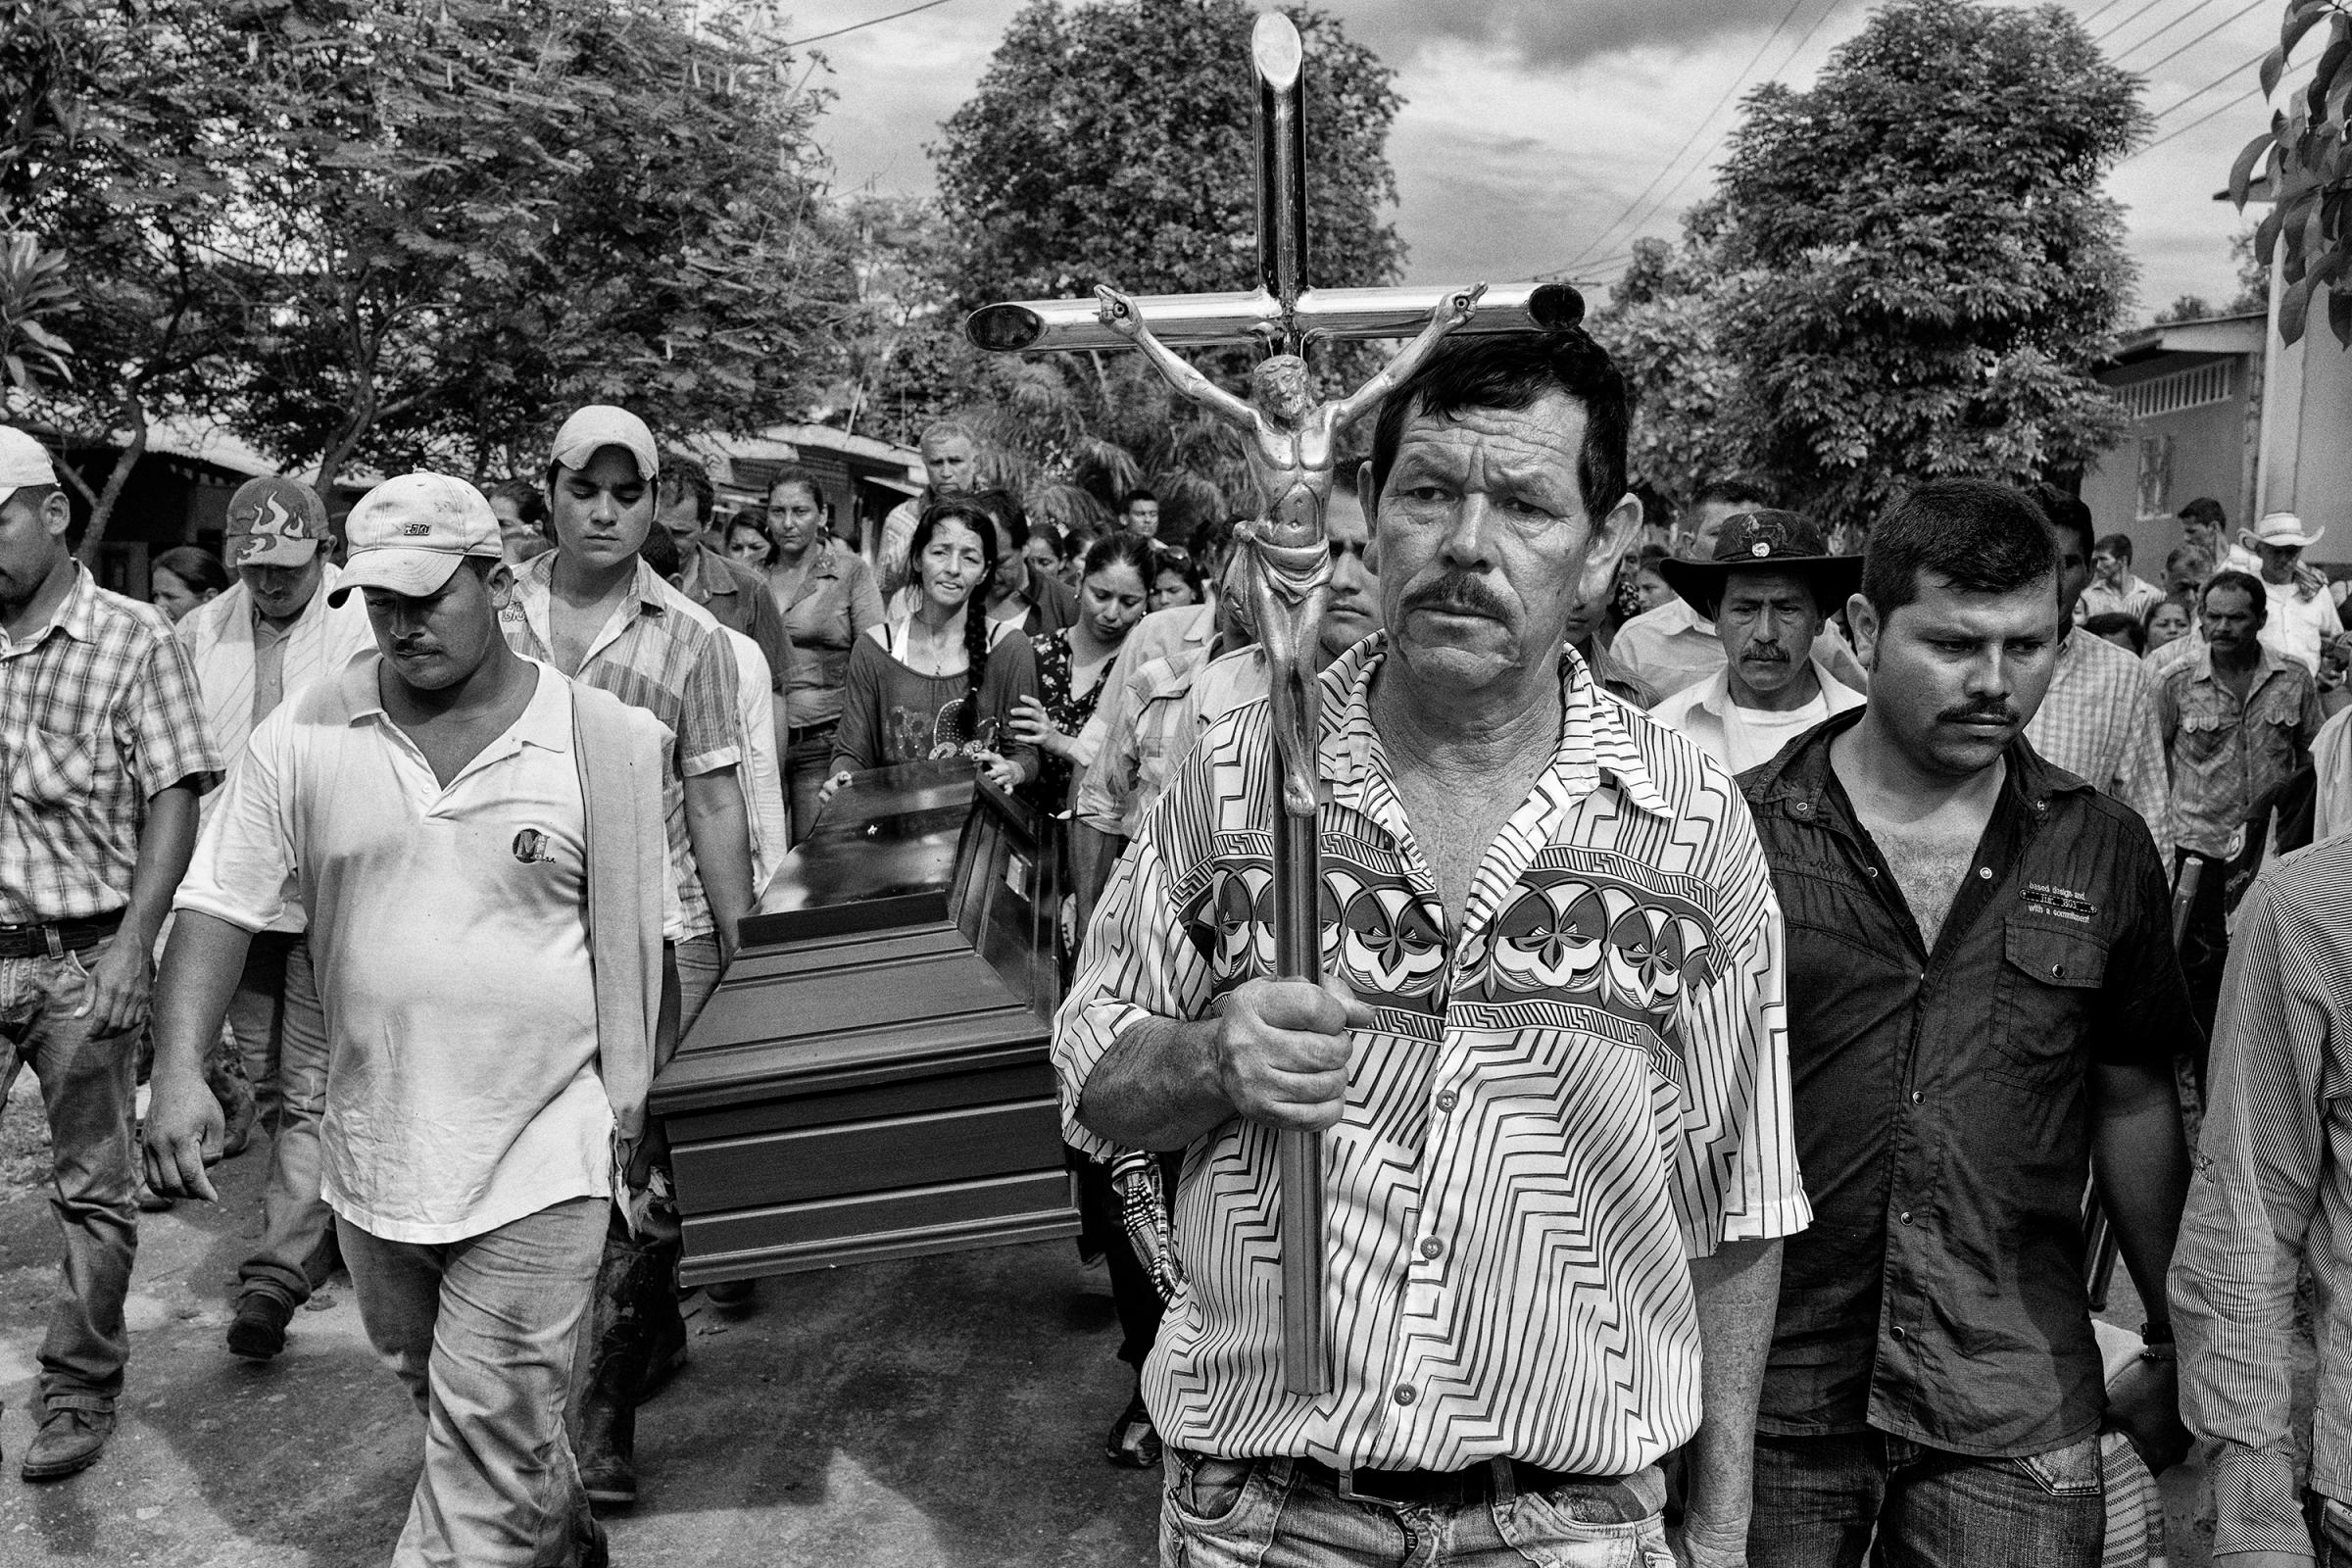 Relatives and friends carry the body of 18-year old Benjamin to the cemetery for burial, Nov. 2013, La Union Peneya, Caqueta, Colombia, Nov. 2013. Benjamin died at age 18 during a fight with the FARC guerrillas